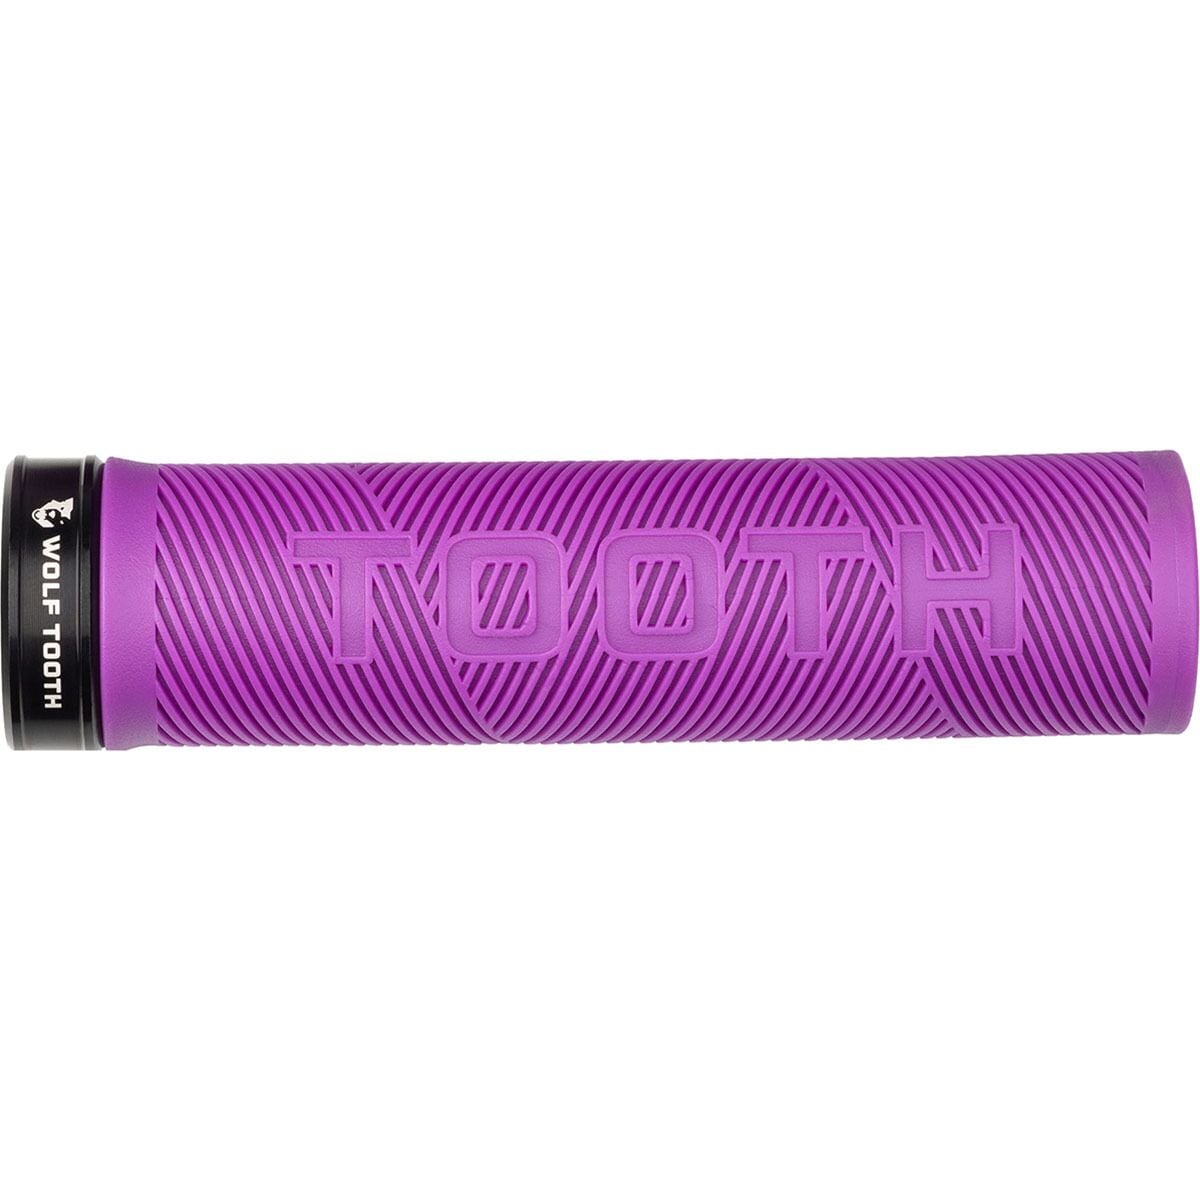 Wolf Tooth Components Wolf Tooth Lock-On Echo Grip Purple Grip/Black Collar, One Size